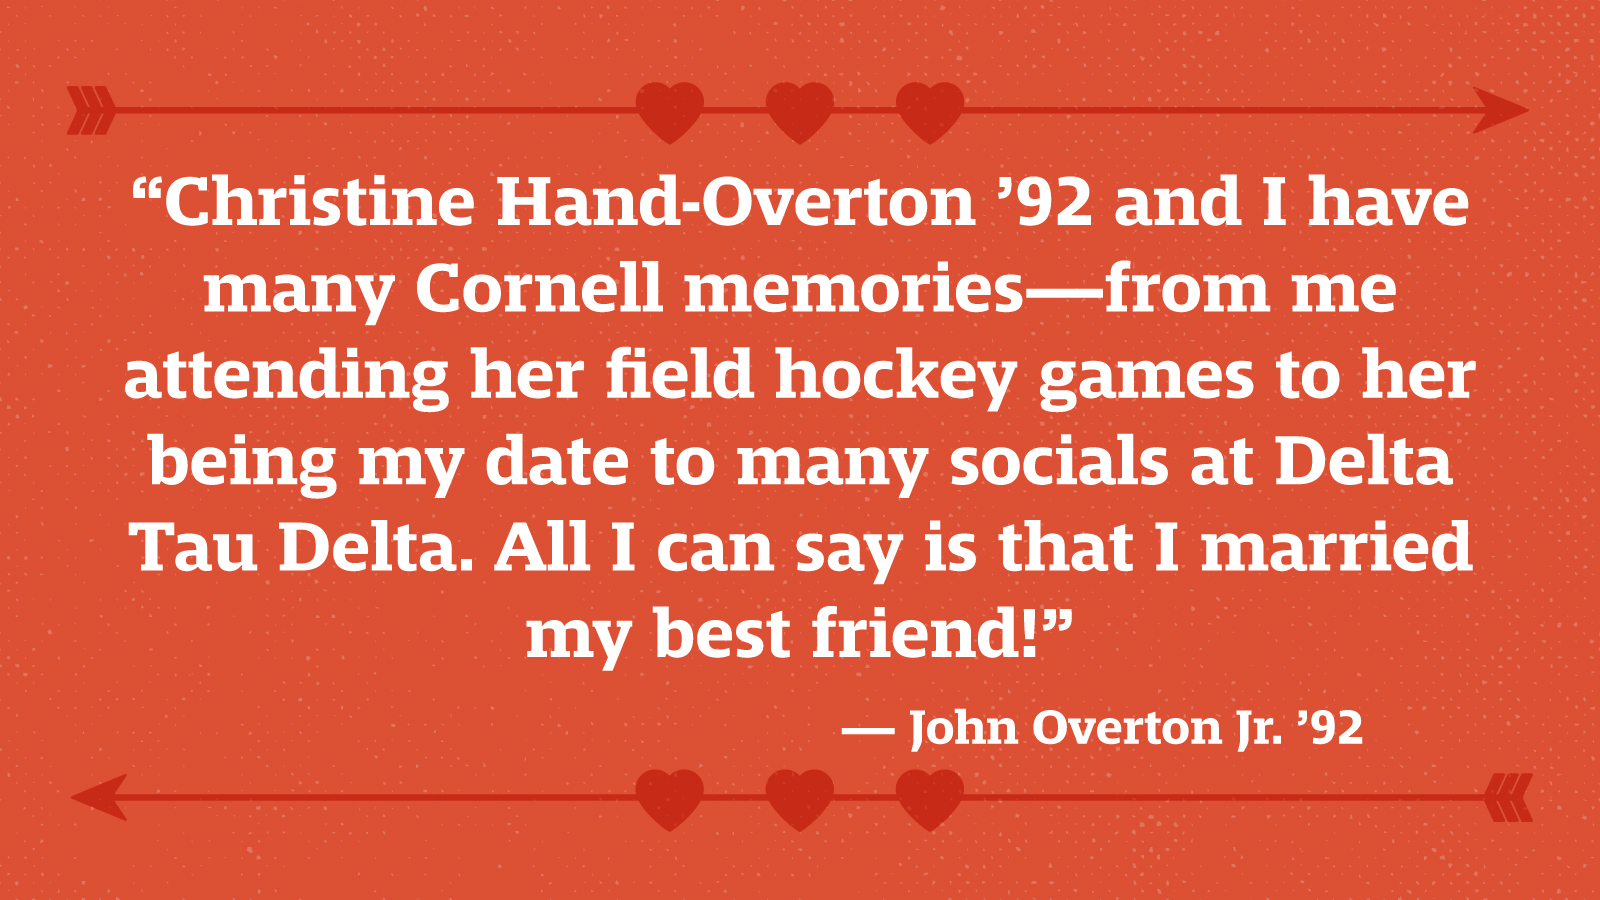 “Christine Hand-Overton ’92 and I have many Cornell memories—from me attending her field hockey games to her being my date to many socials at Delta Tau Delta. All I can say is that I married my best friend!” — John Overton Jr. ’92